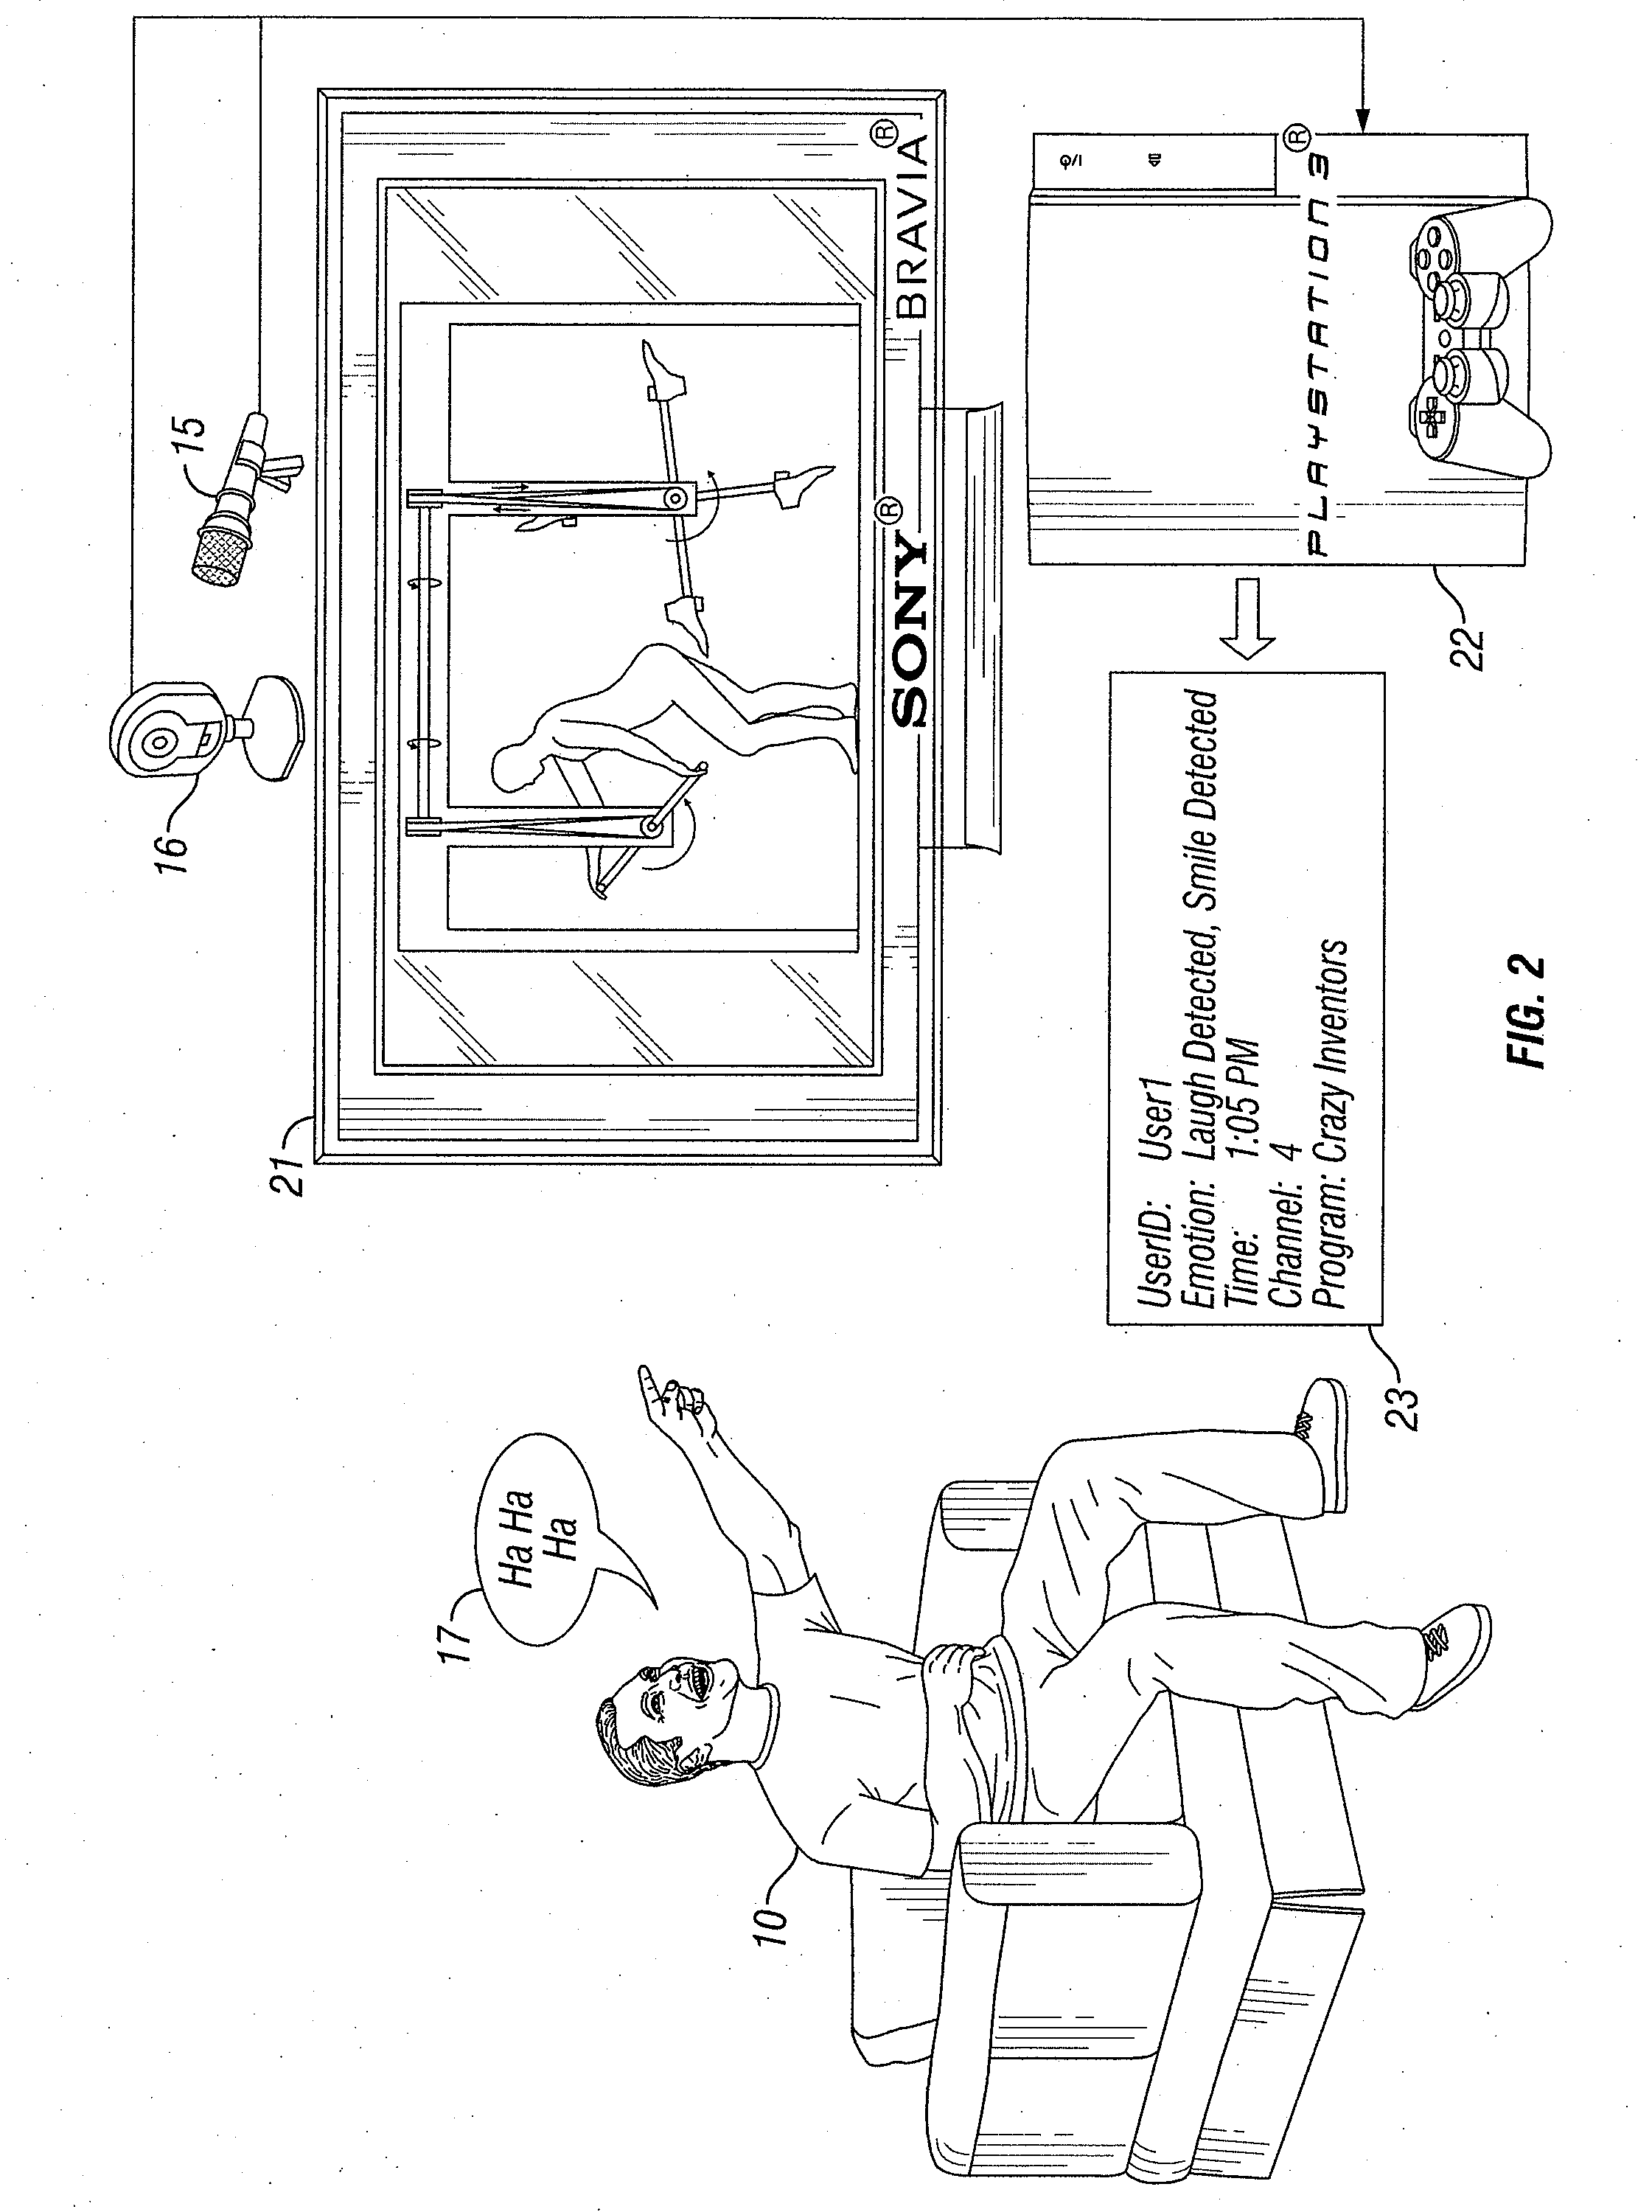 Laugh detector and system and method for tracking an emotional response to a media presentation